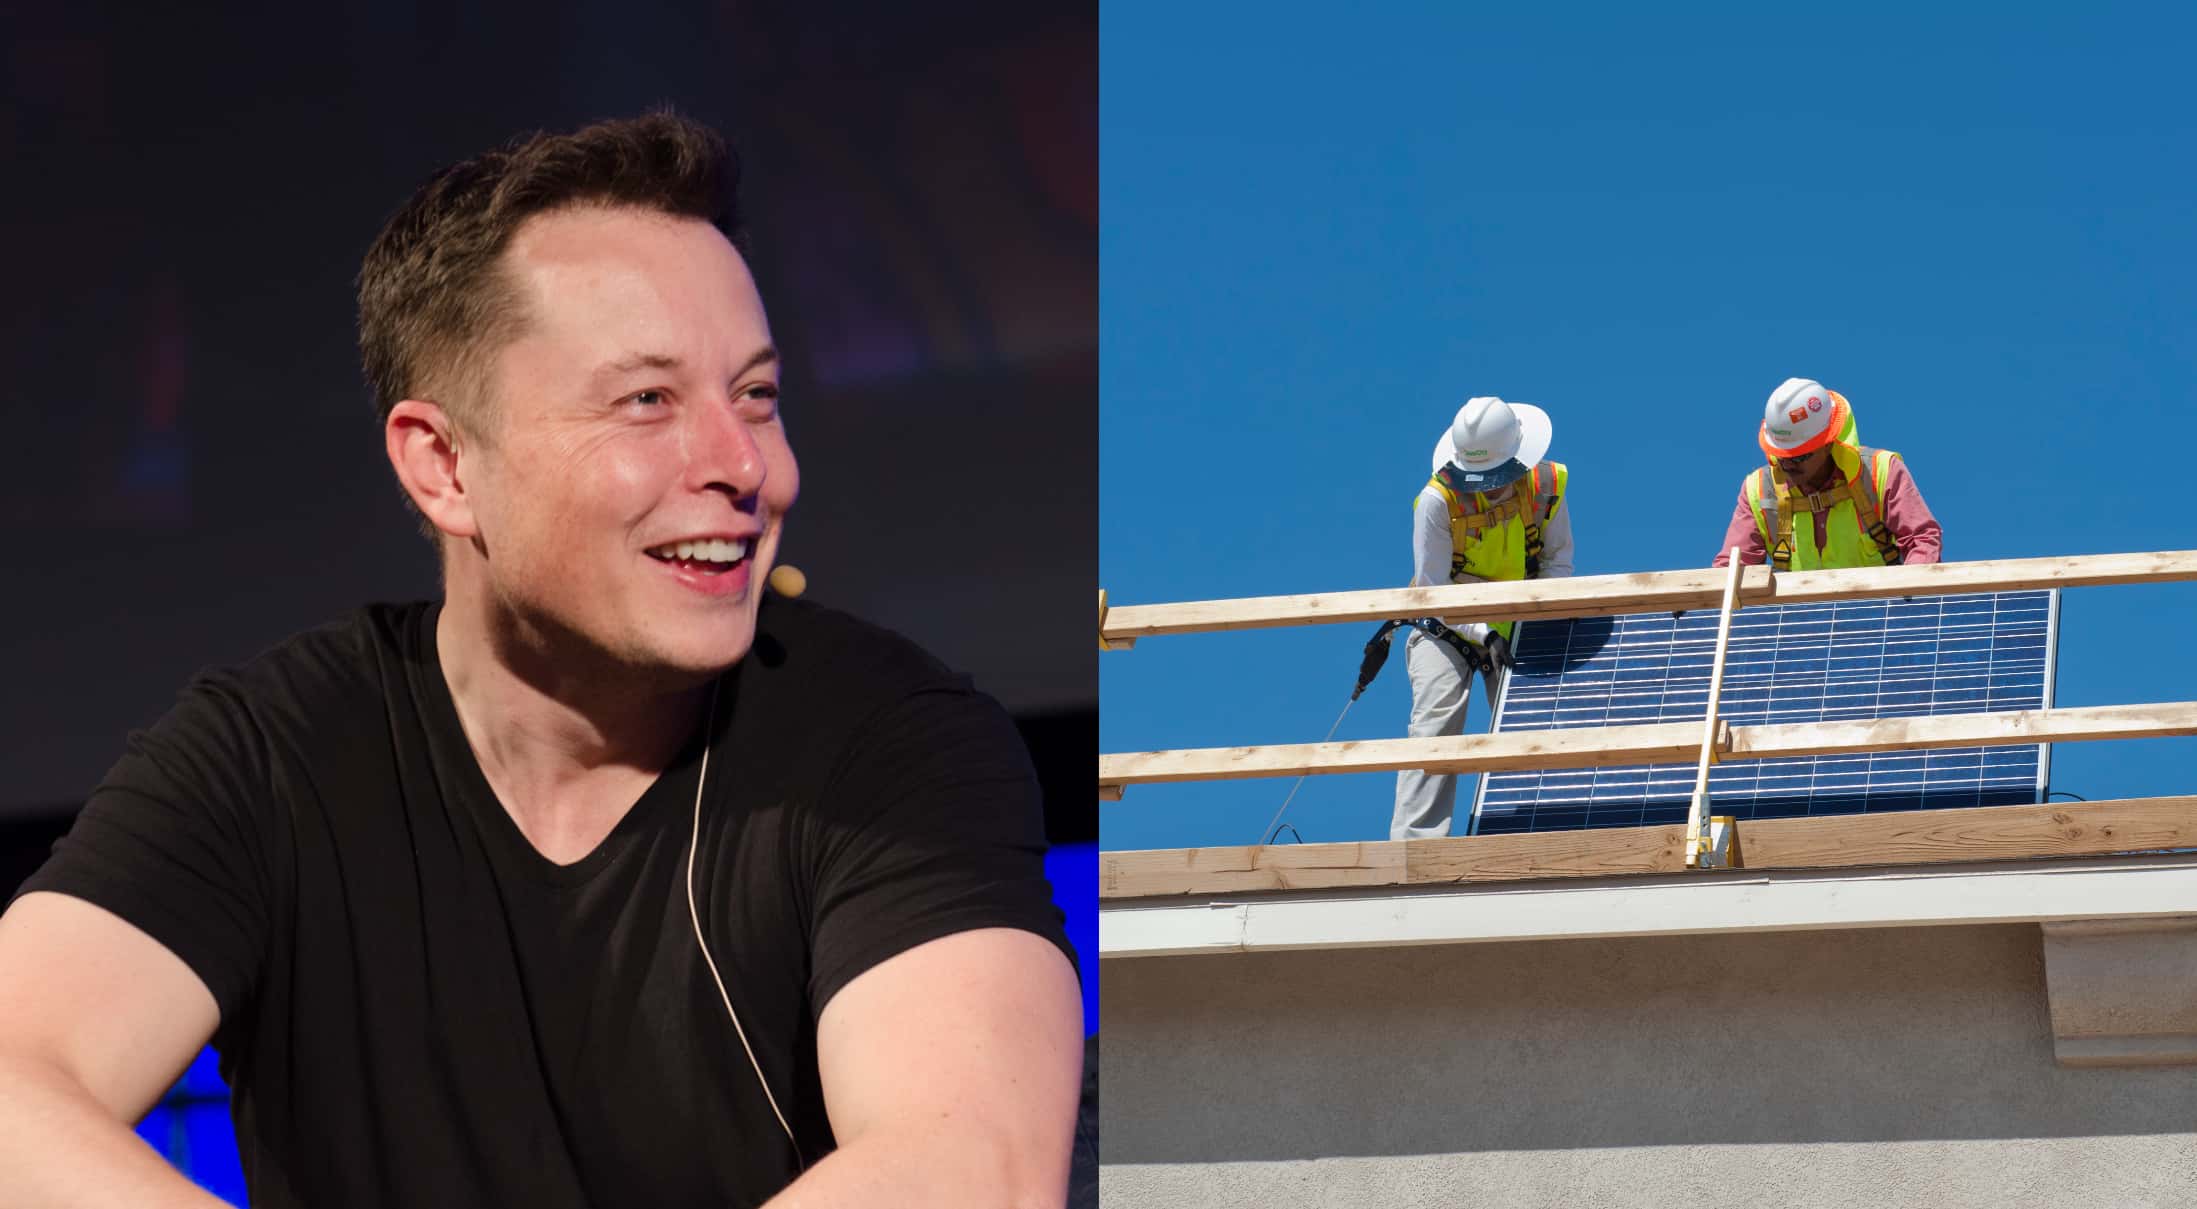 11 Surprising Facts About Elon Musk - YouTube